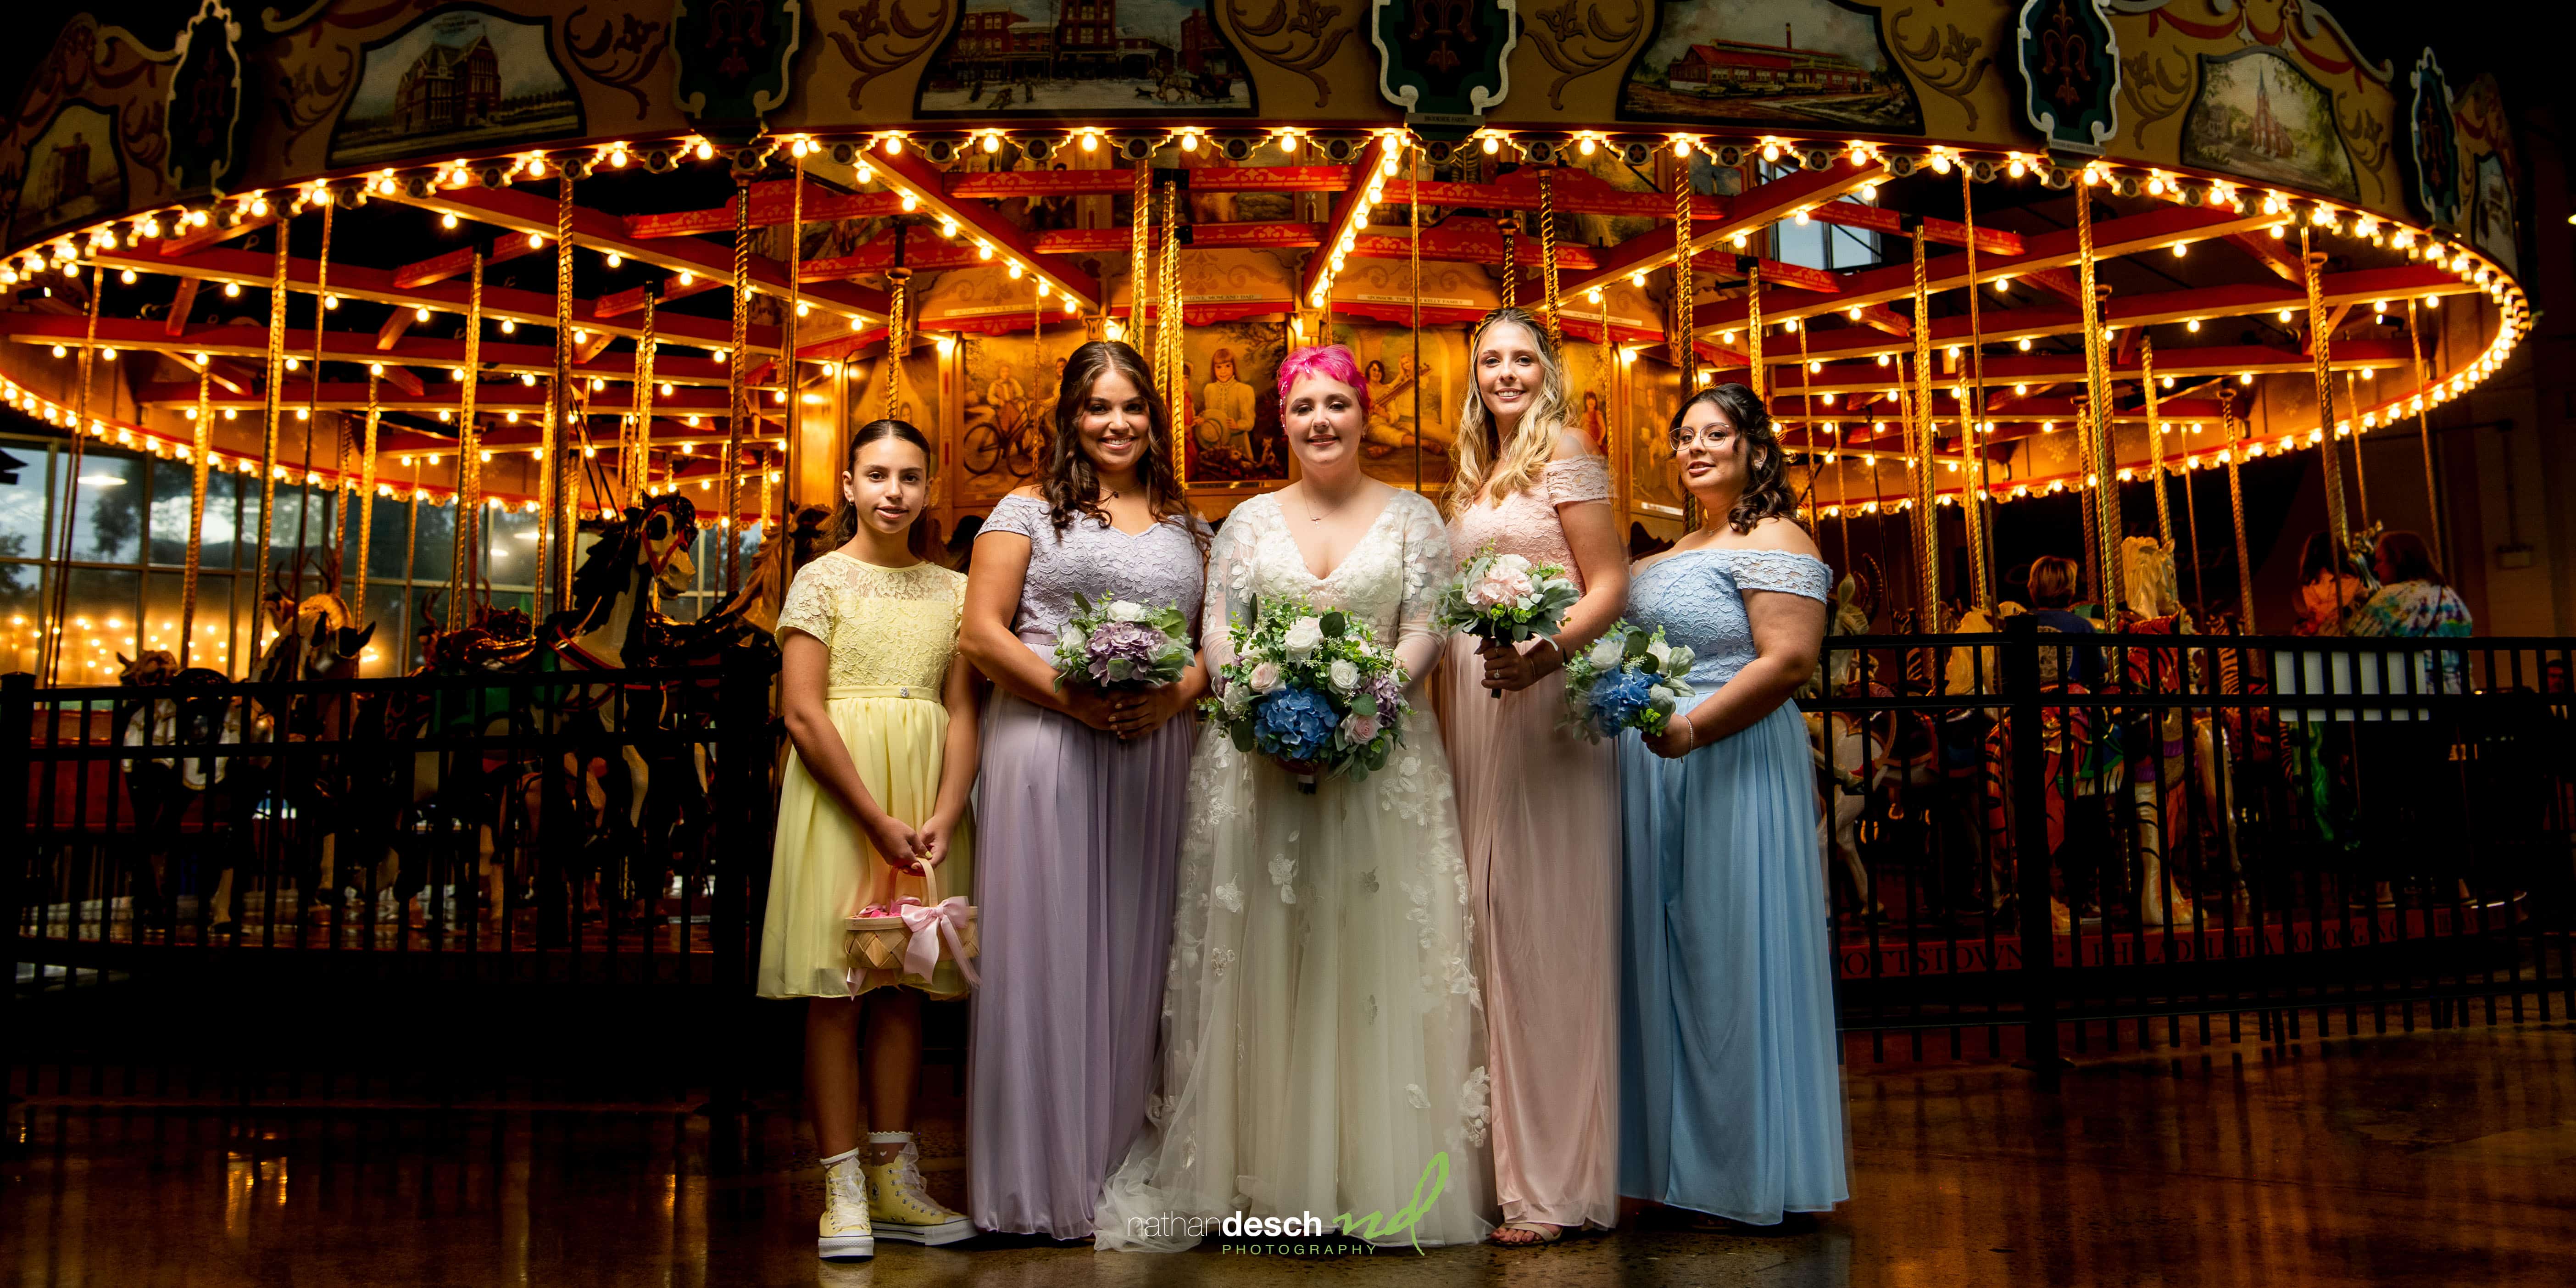 Bride and bridesmaids at carousel in Pottstown